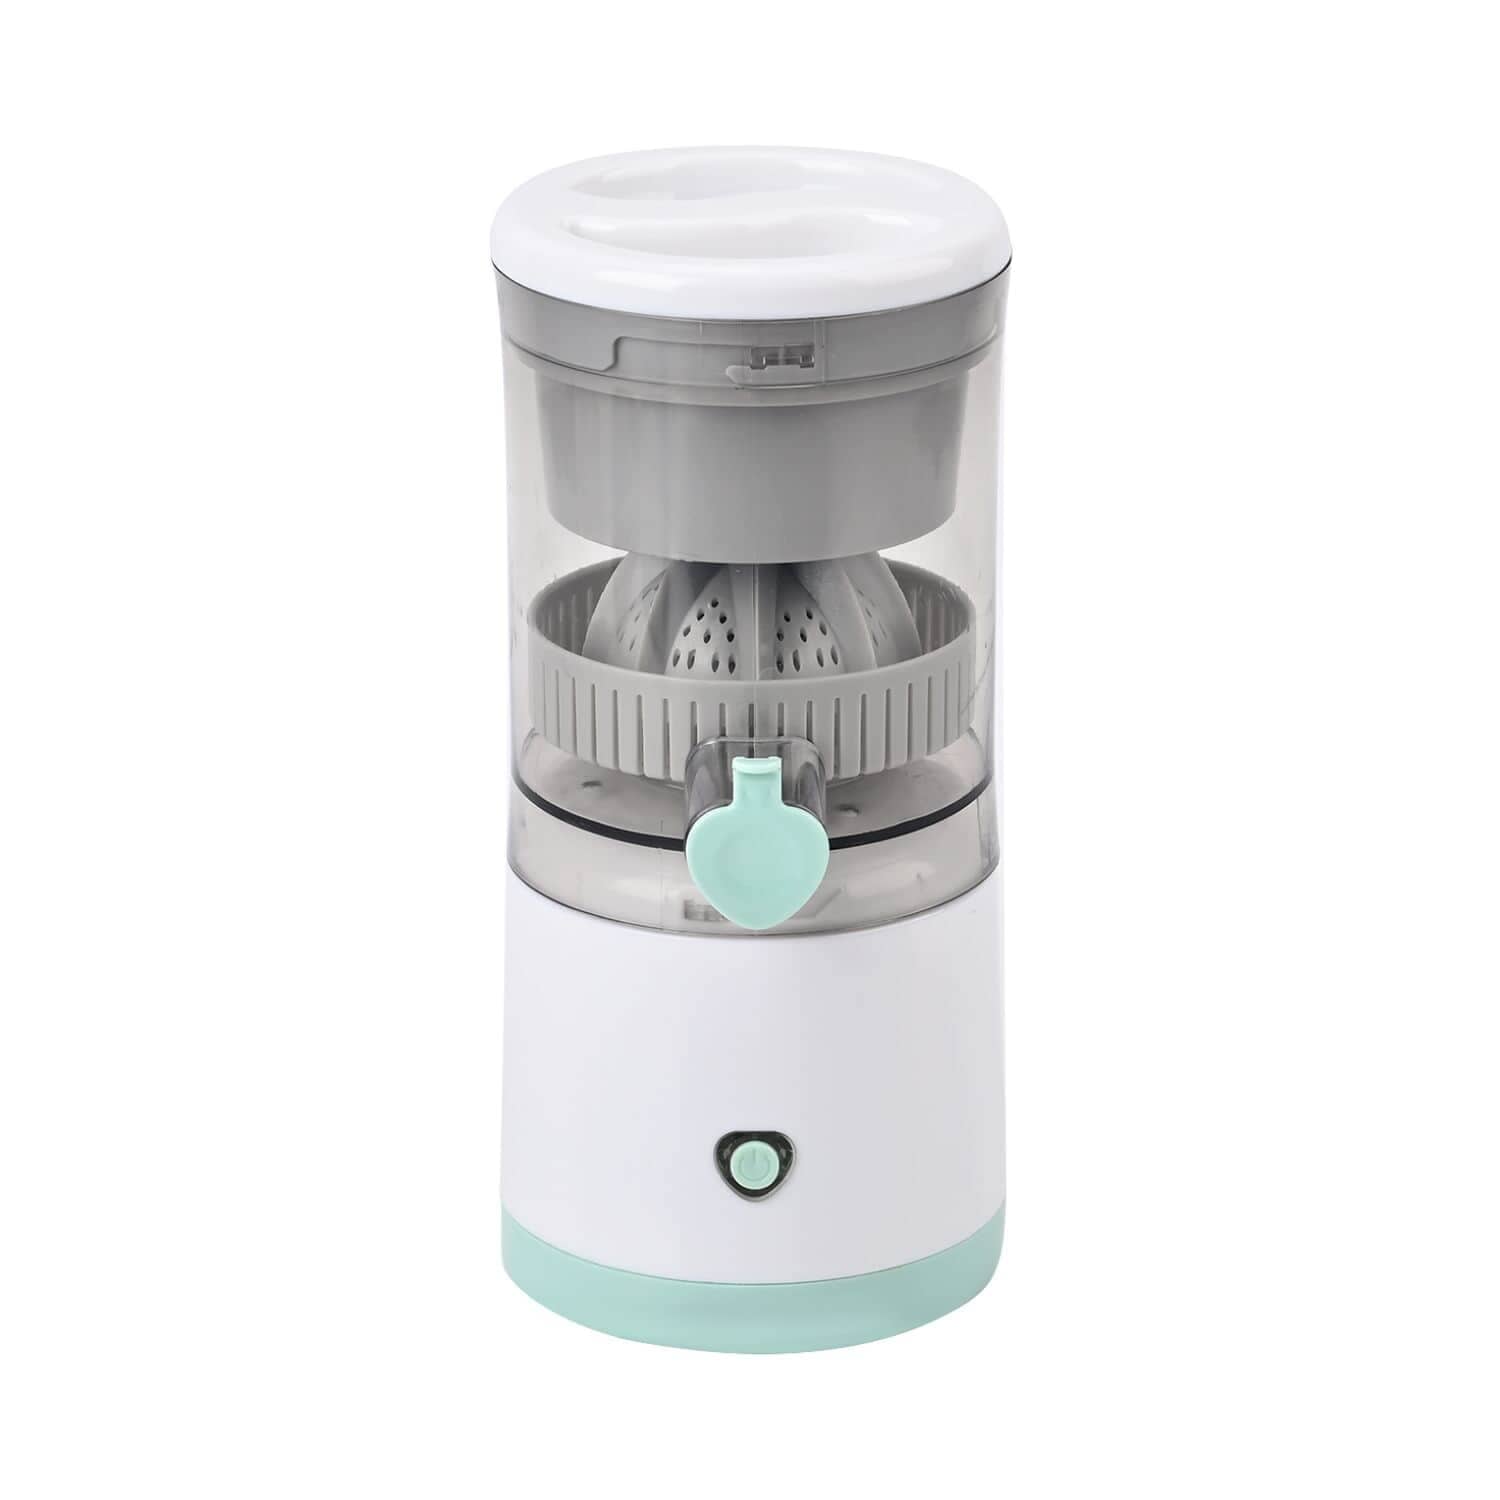 https://ak1.ostkcdn.com/images/products/is/images/direct/4d63eecfd7001995e797ec4c15b64bec76158067/USB-Rechargeable-Cordless-and-Portable-Juicer-%28Battery-1500-mAh%29-%2835w%2C.jpg